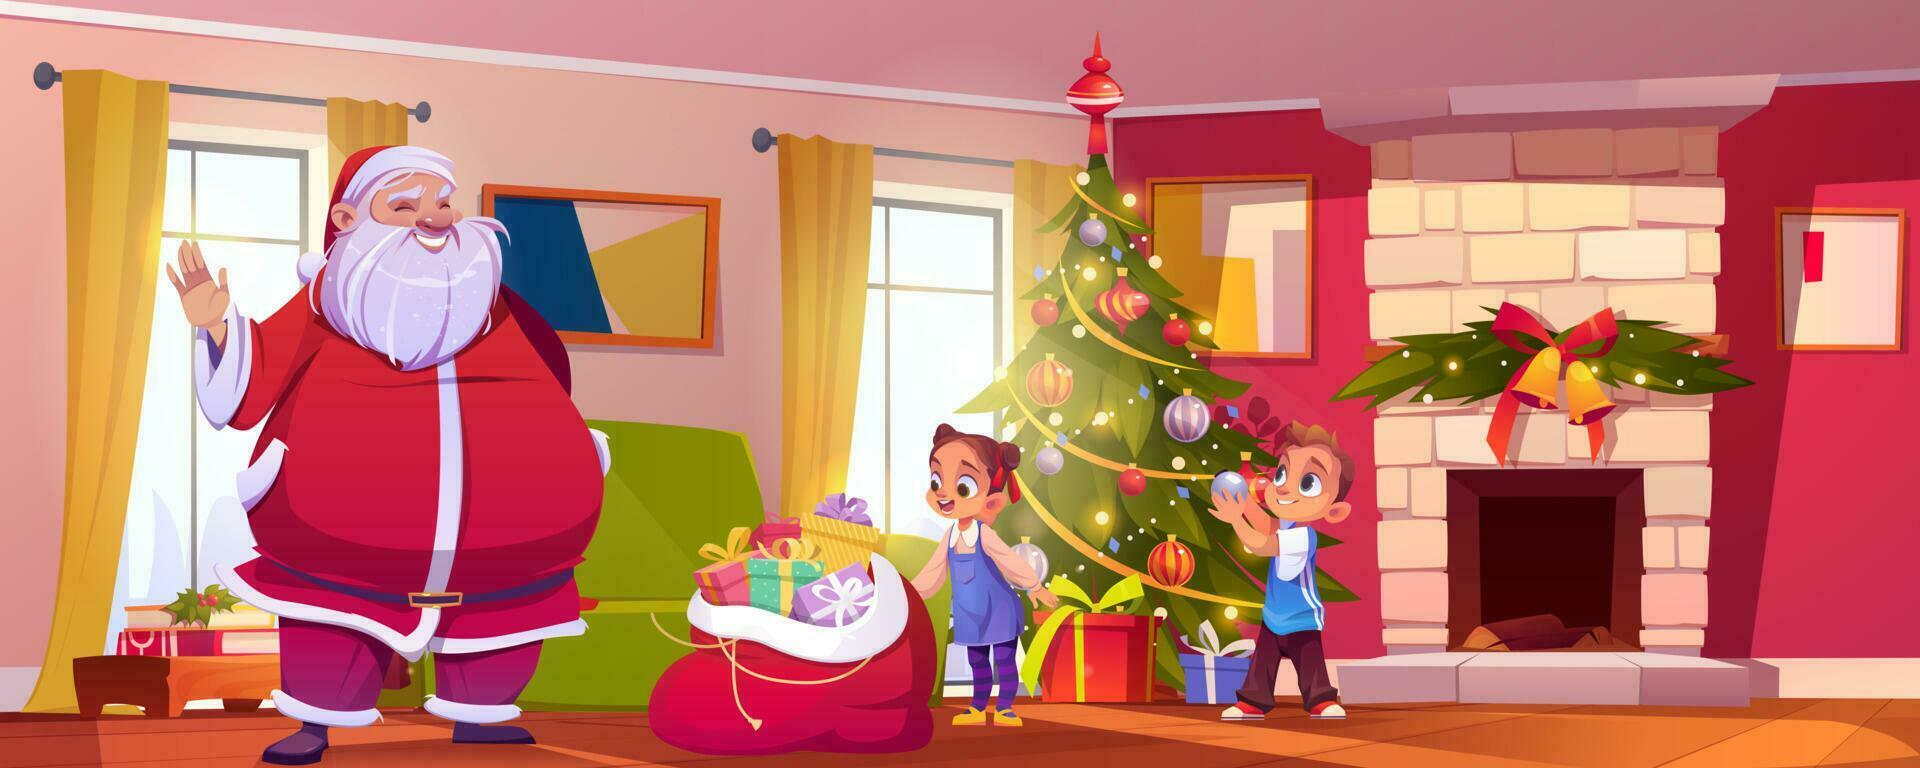 Christmas living room with Santa and fireplace vector